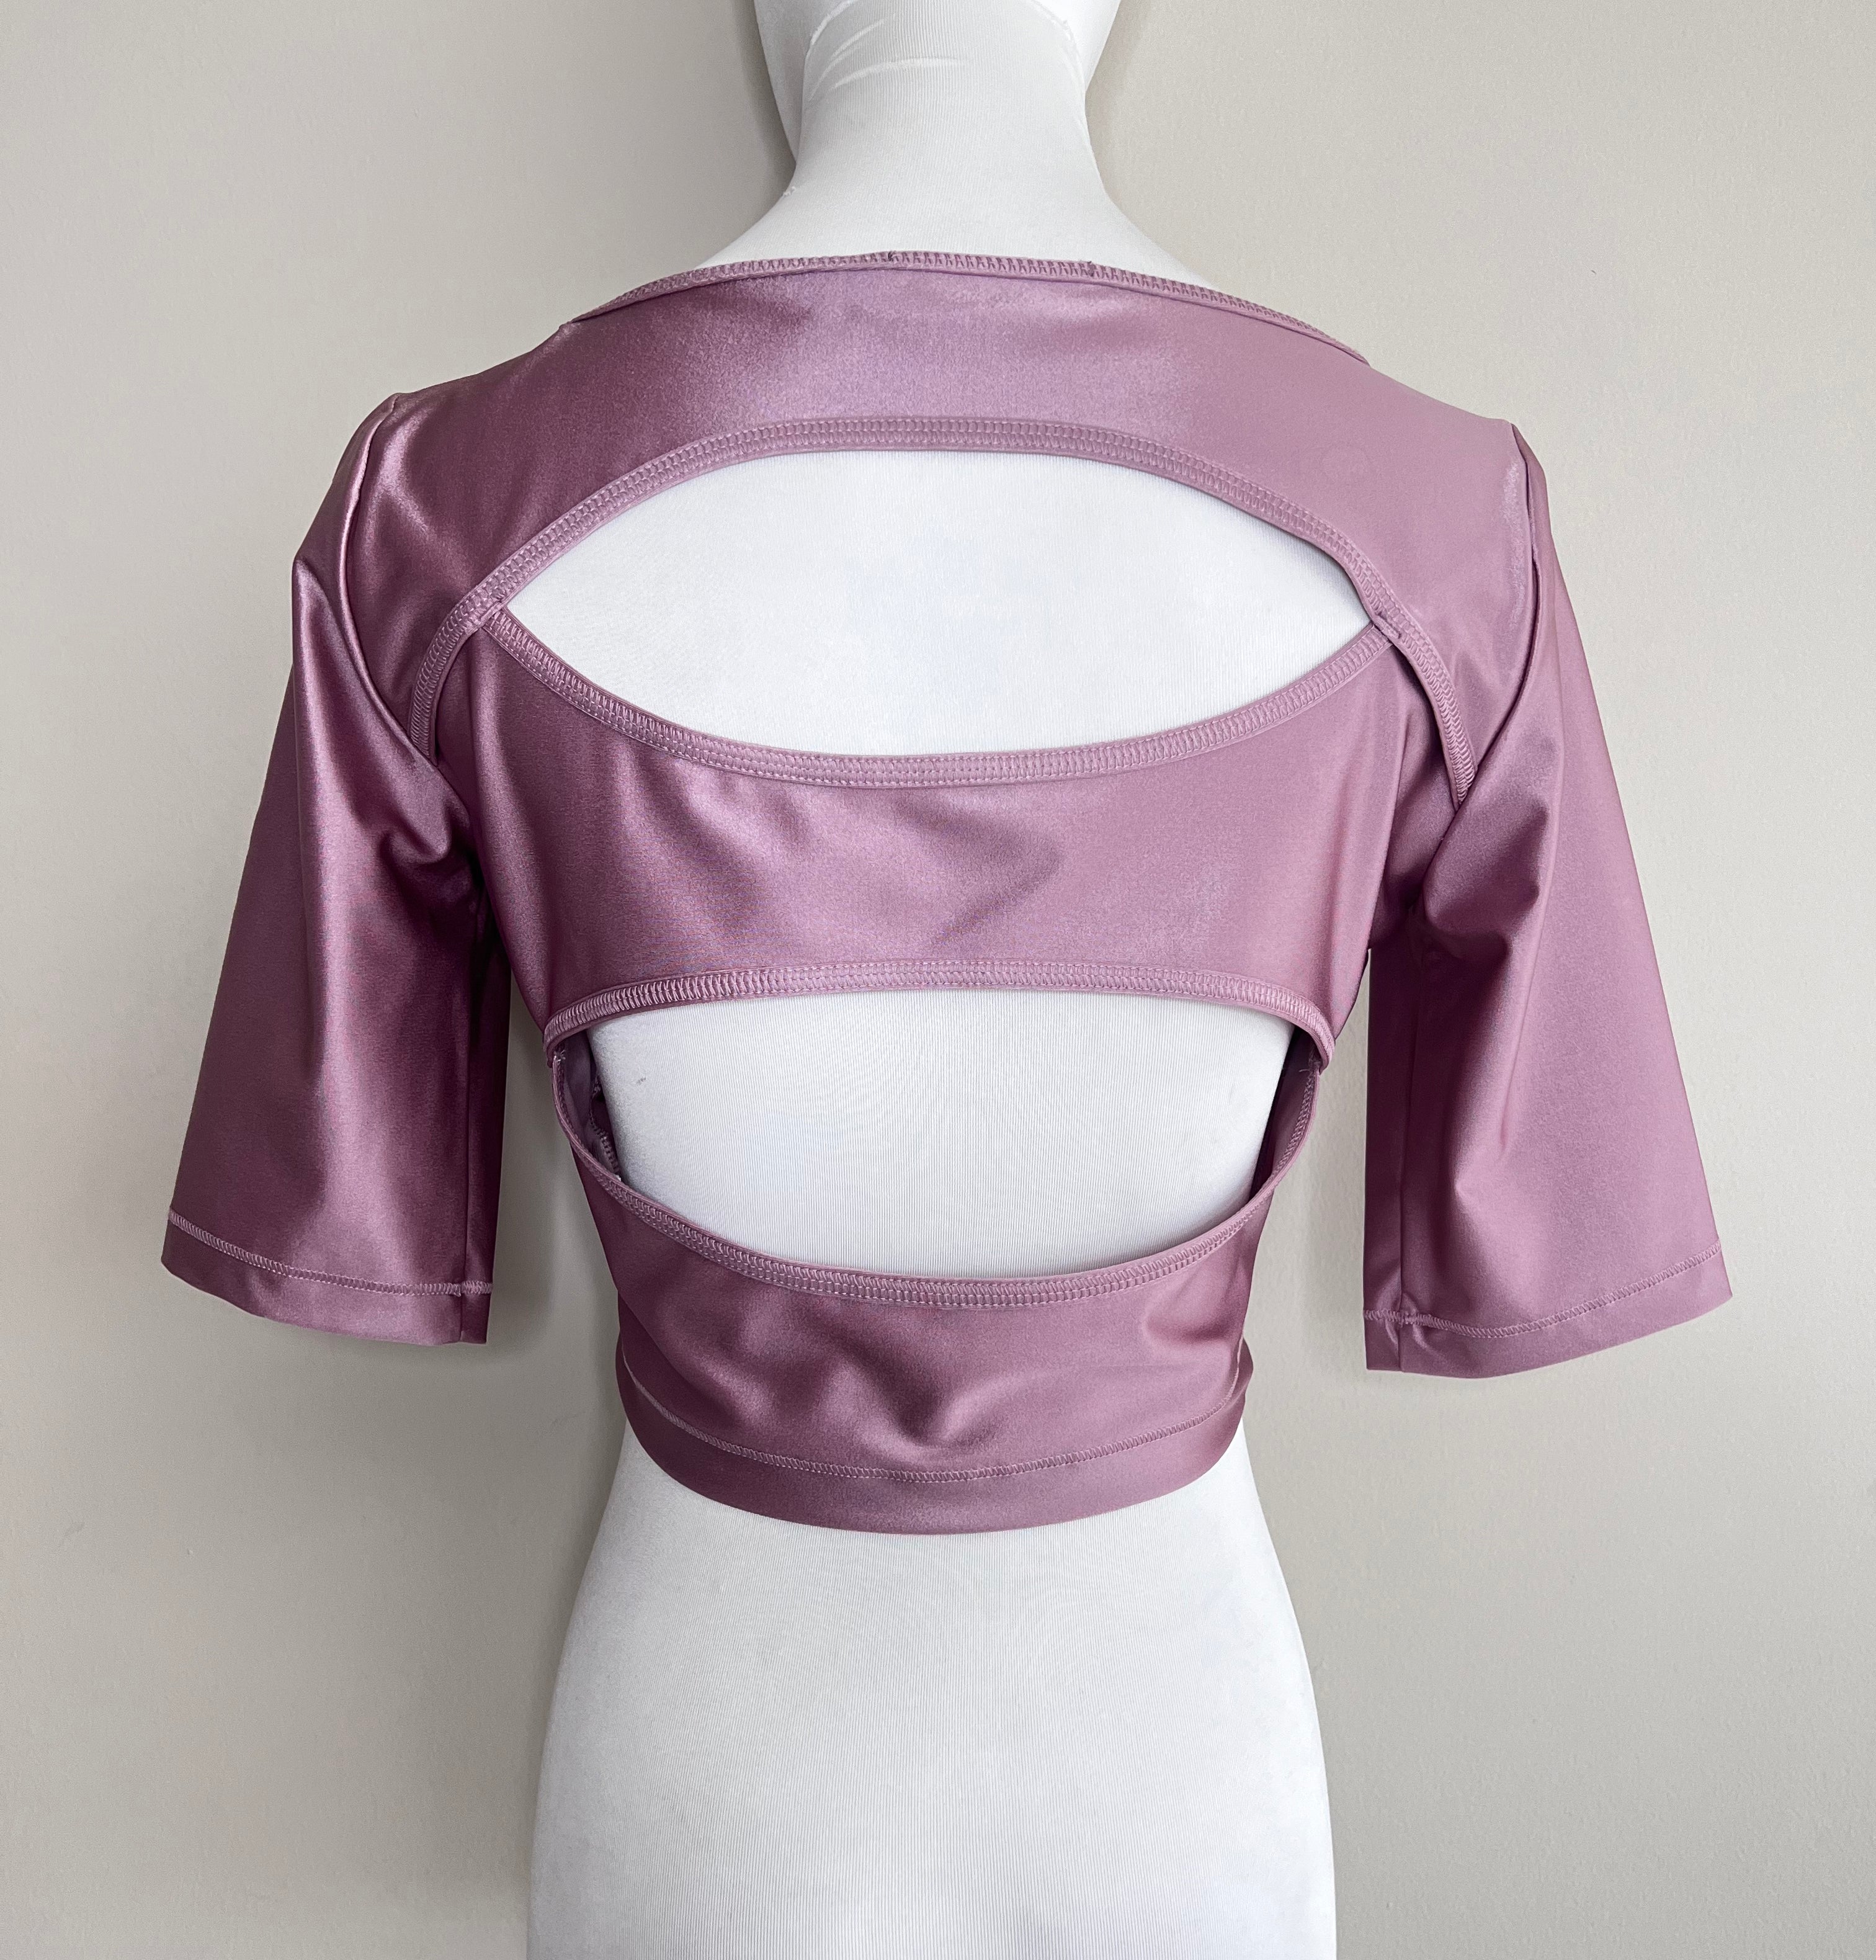 Pink Cropped tricot top with logo on the front and cut-out details on the back - Adidas By Stella McCartney